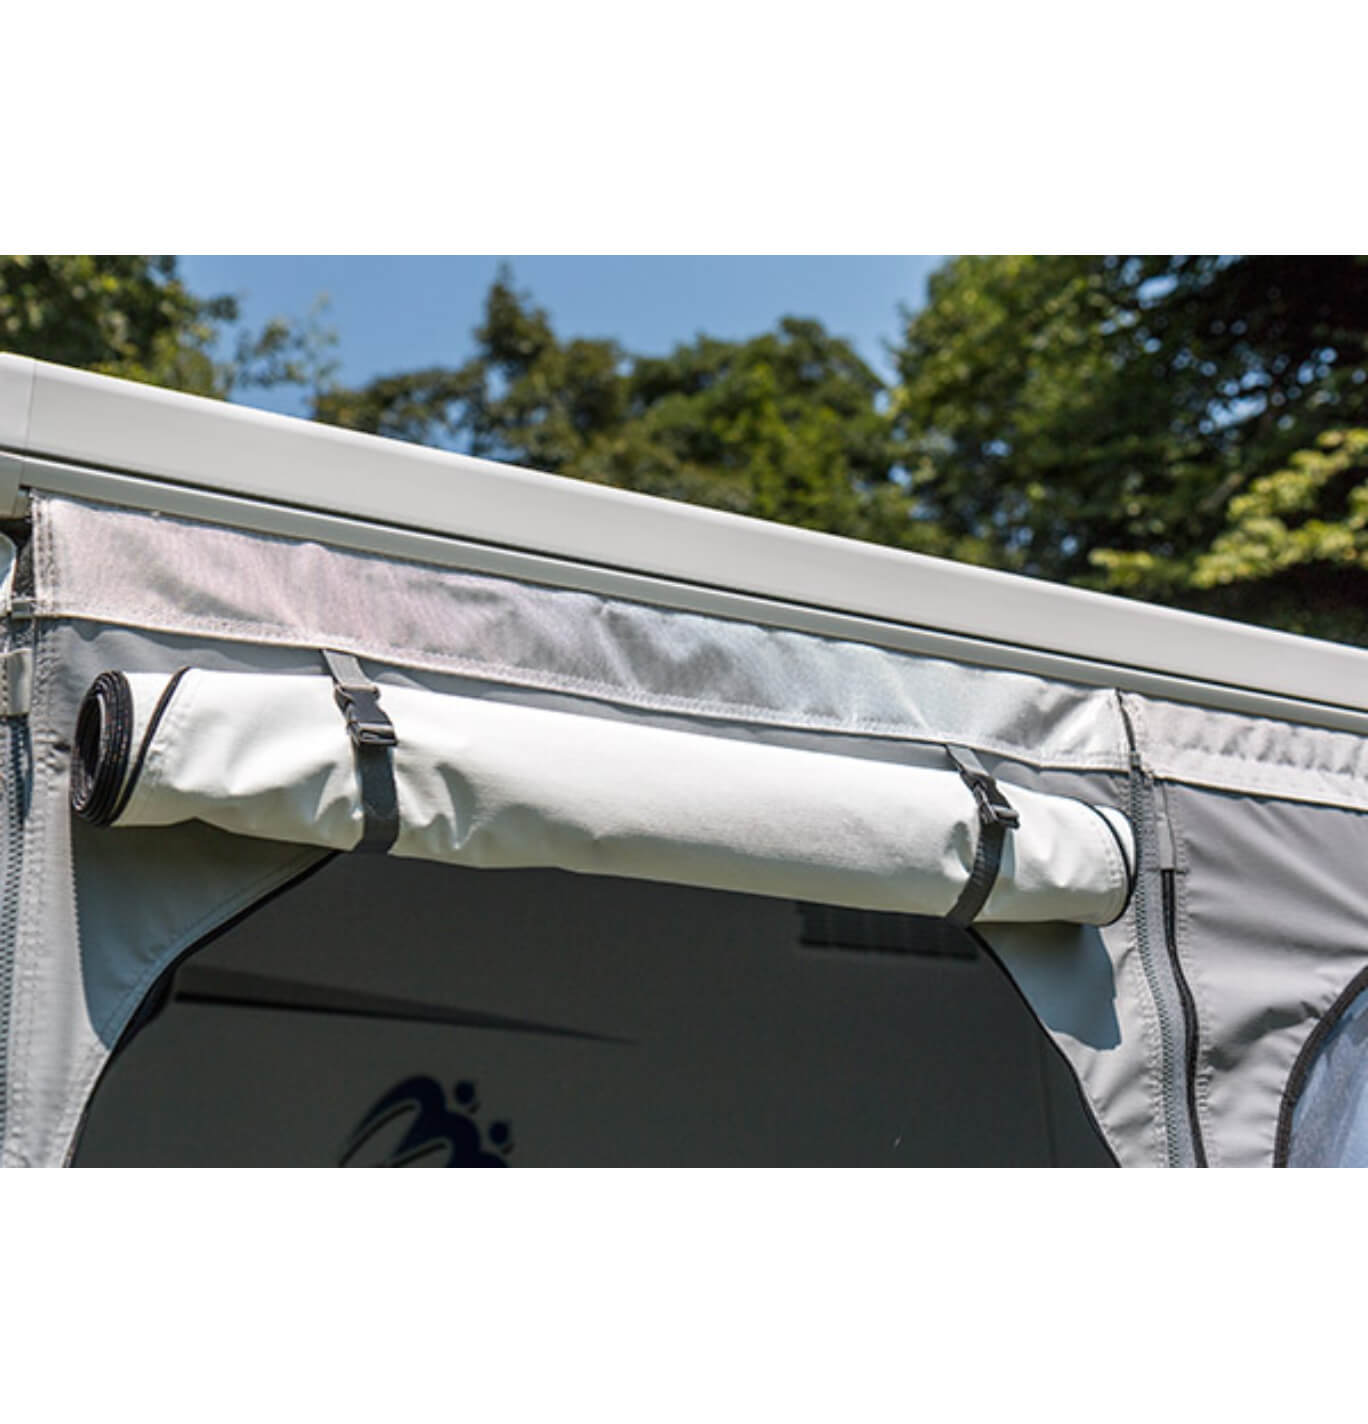 Fiamma Privacy Room Medium 300 for F45s Awnings | 08366A01-